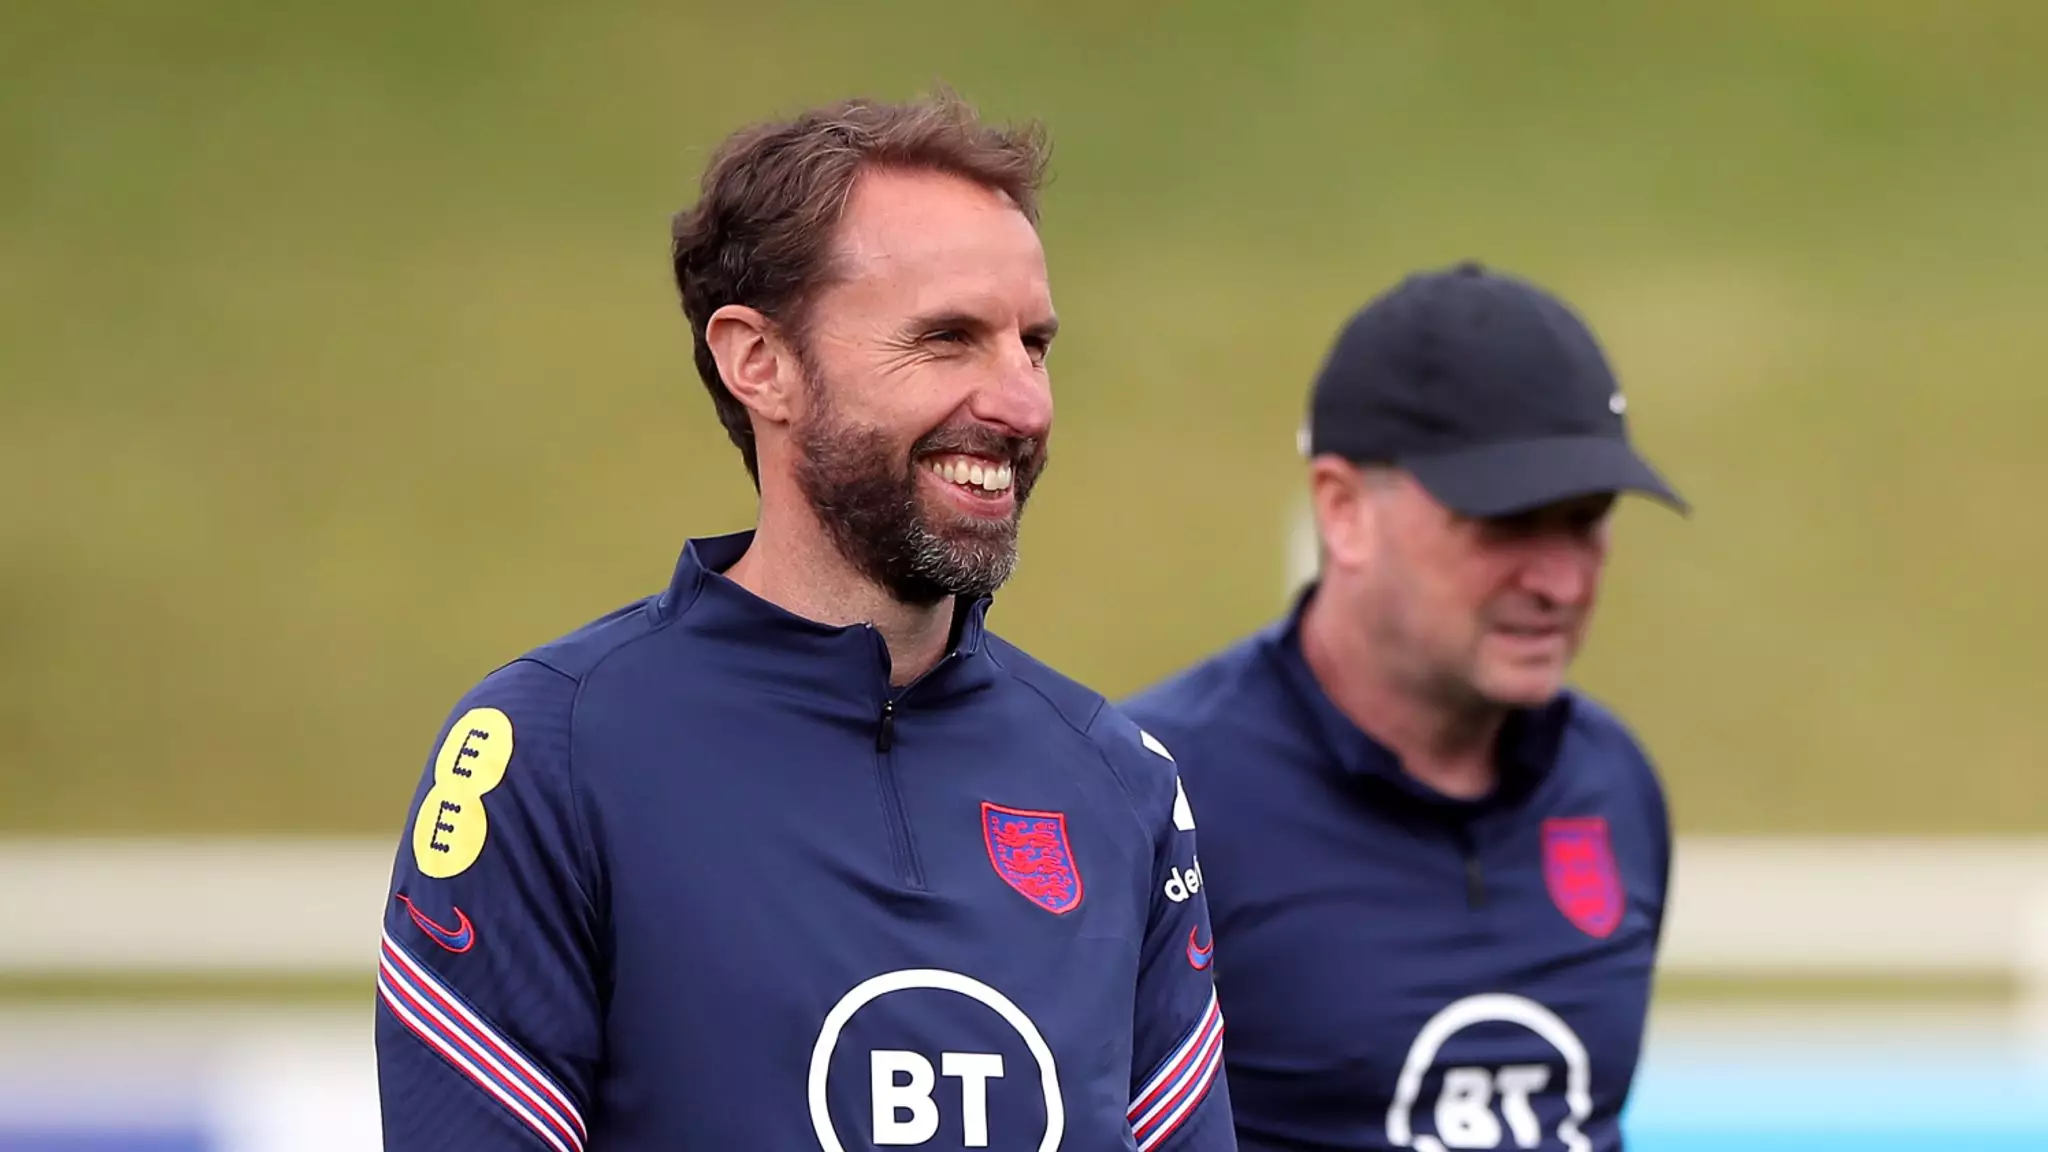 Gareth Southgate's men will travel to Rome and play under lights at the Stadio Olimpico.